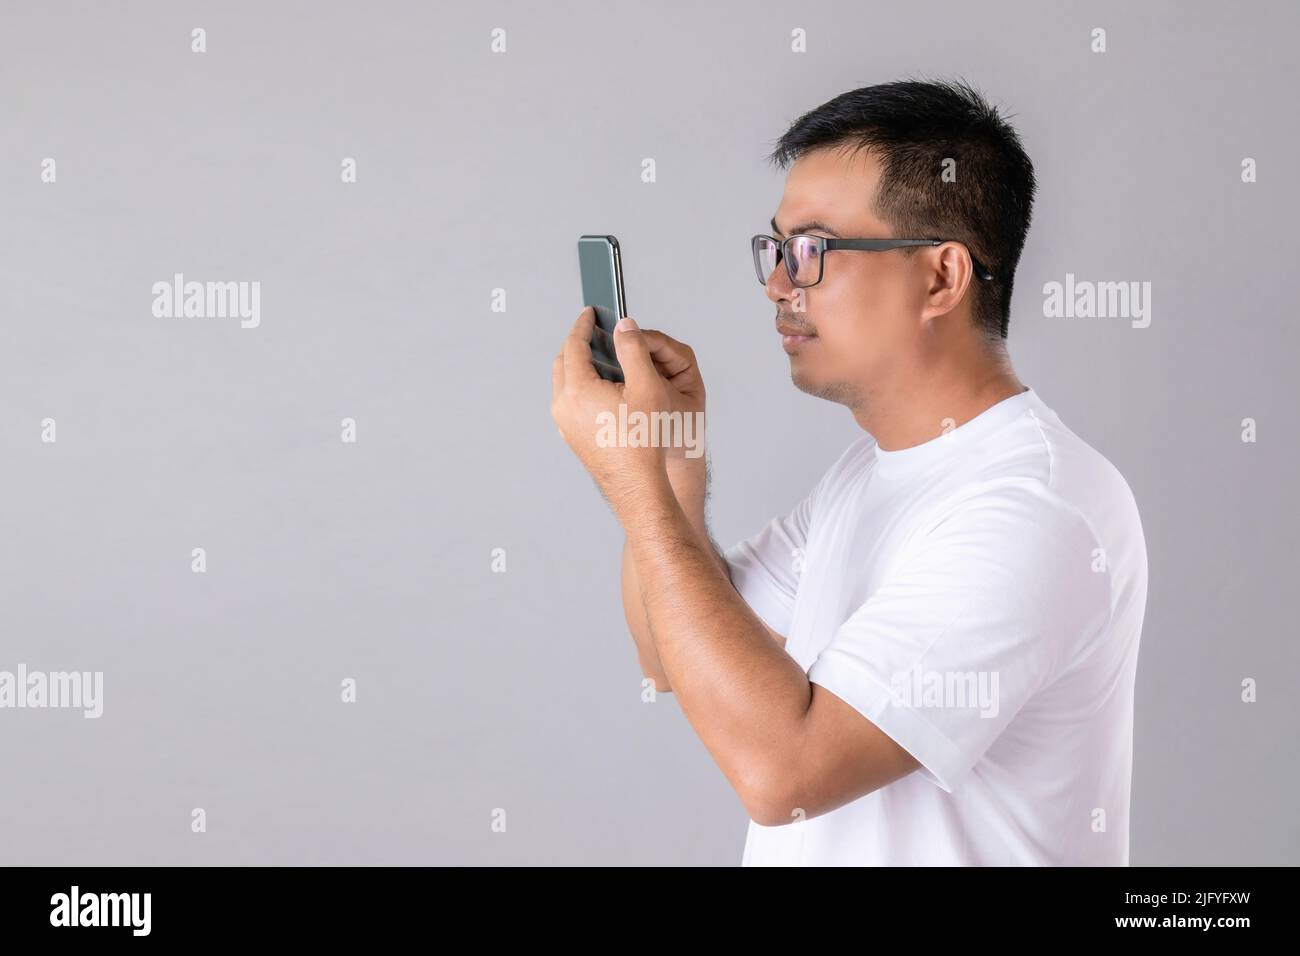 Short or long sighted concept : Man weraing eyeglasses and trying to look clearly on smarthphone in studio shot on grey background Stock Photo